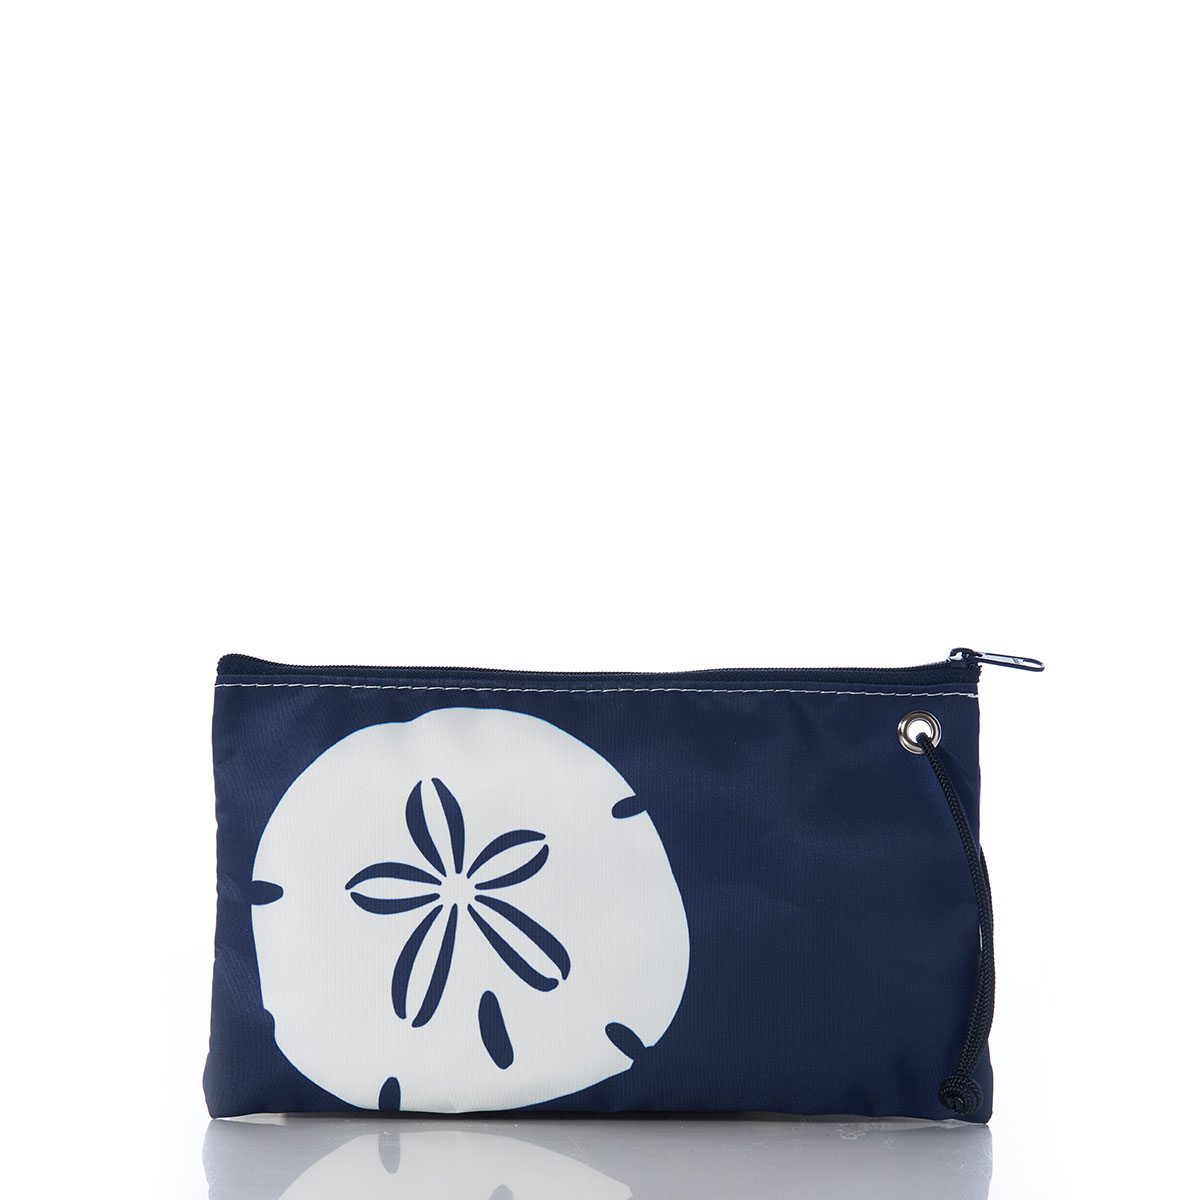 a navy recycled sail cloth wristlet with a rope string is embellished with a white sand dollar